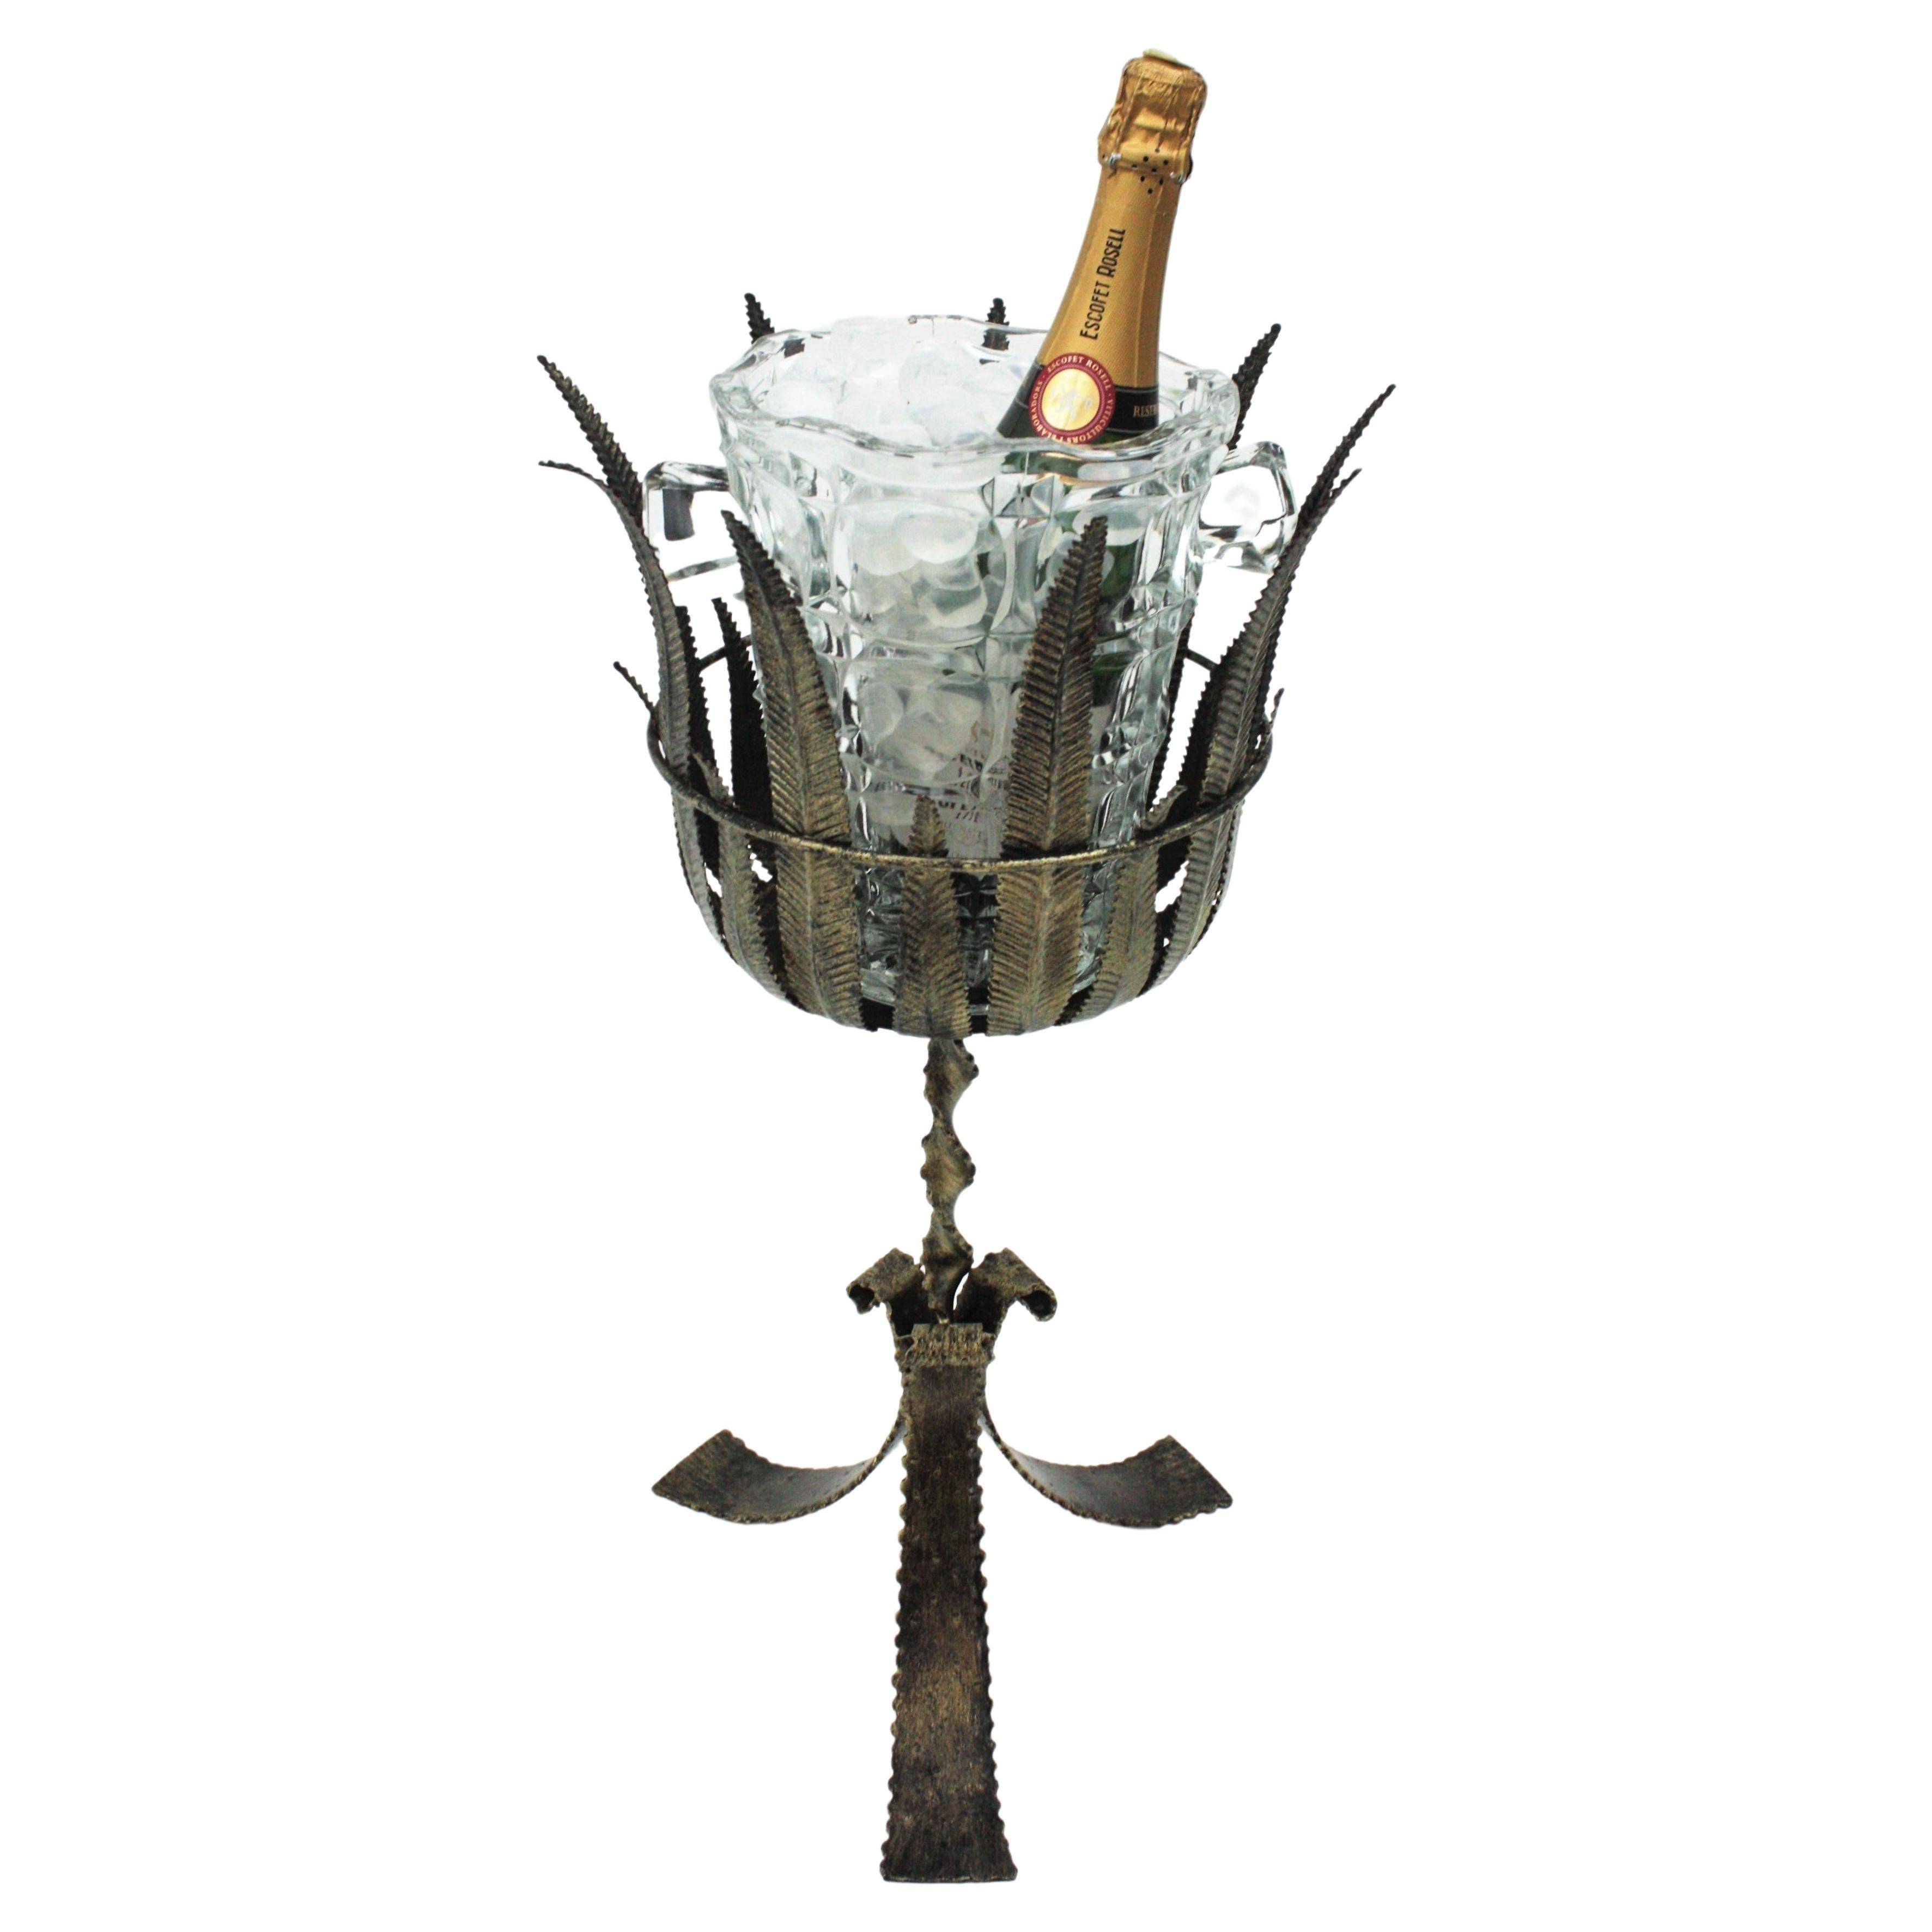 One of a kind foliage gilt iron tripod stand with pressed glass ice bucket, Spain, 1940s
This iron ice bucket serving stand is all made by hand. The handwrought iron stand has a leafed richly adorned top standing on and tripod base and holding a